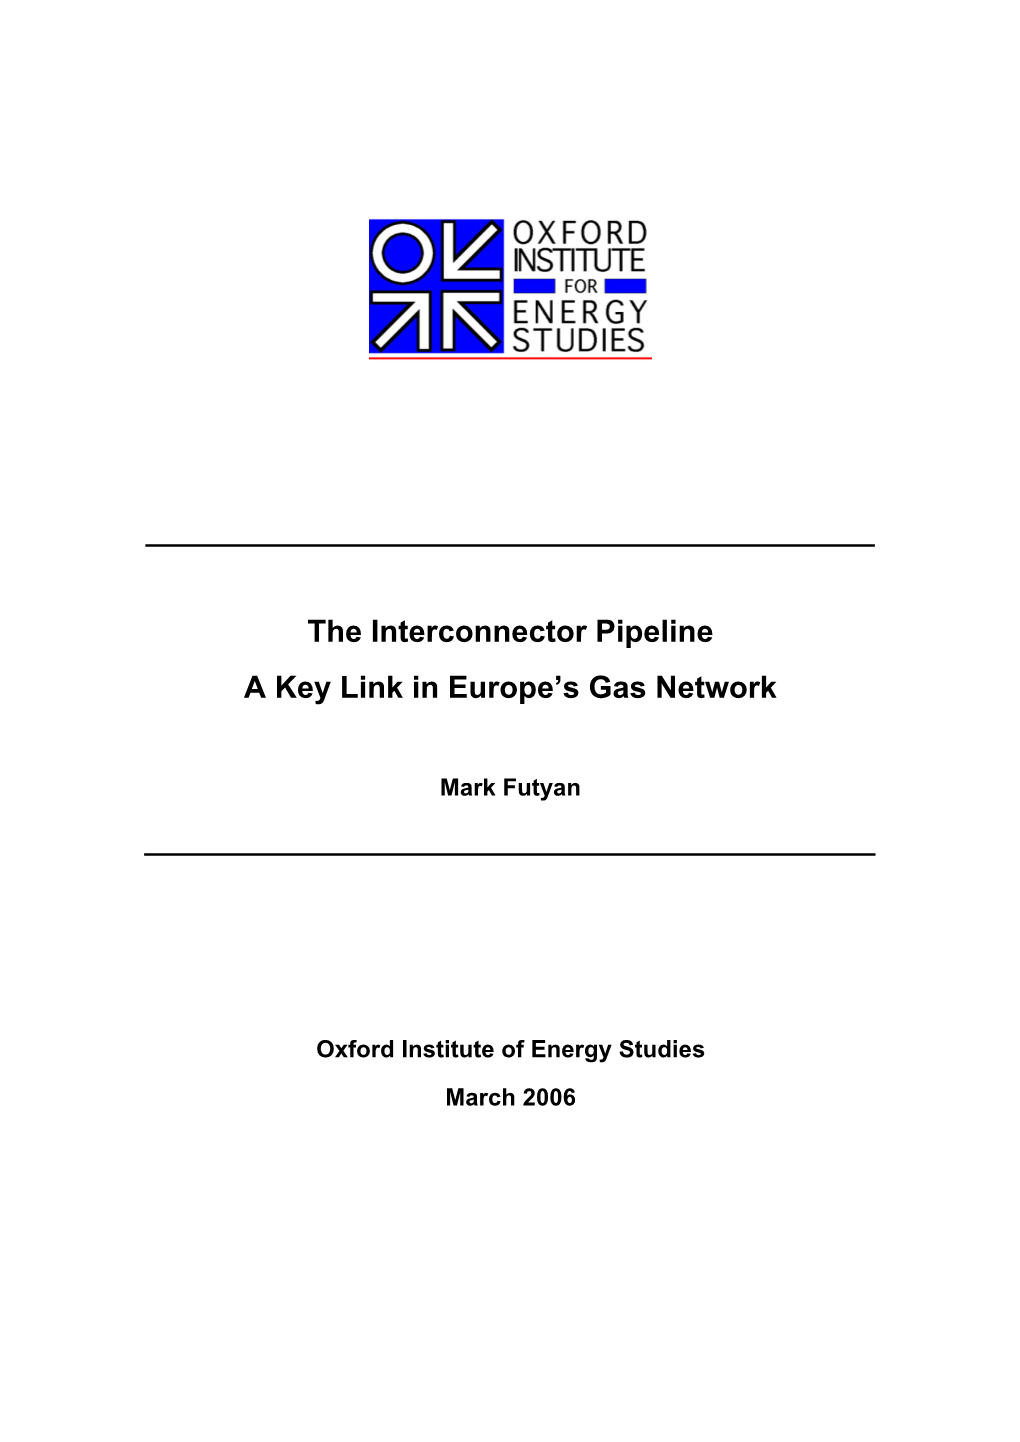 The Interconnector Pipeline a Key Link in Europe's Gas Network